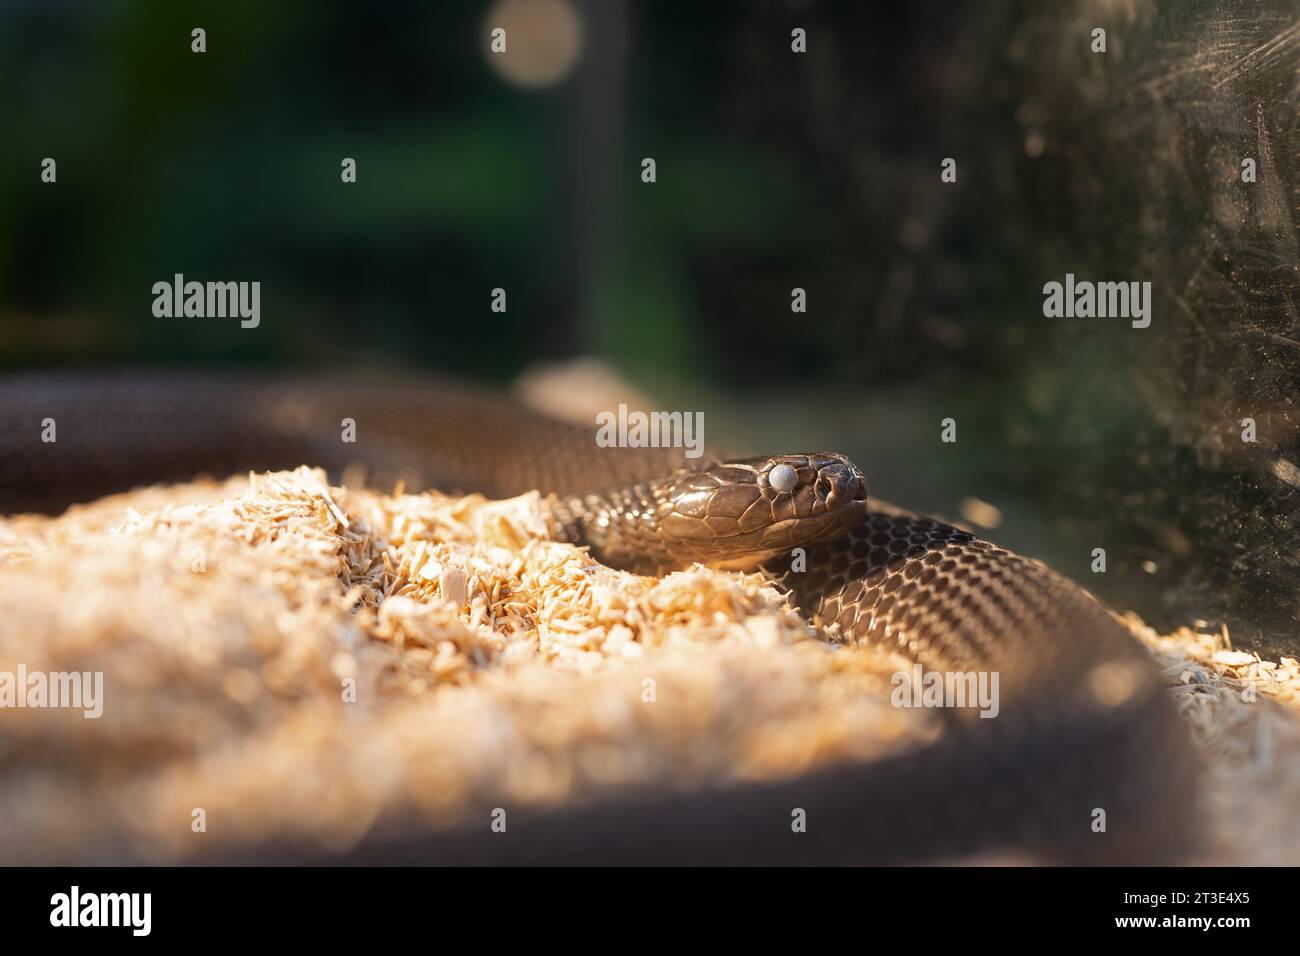 Close-up of a Indochinese spitting cobra entering the molting stage. The snake's eyes were cloudy because it was entering the molting stage. Stock Photo